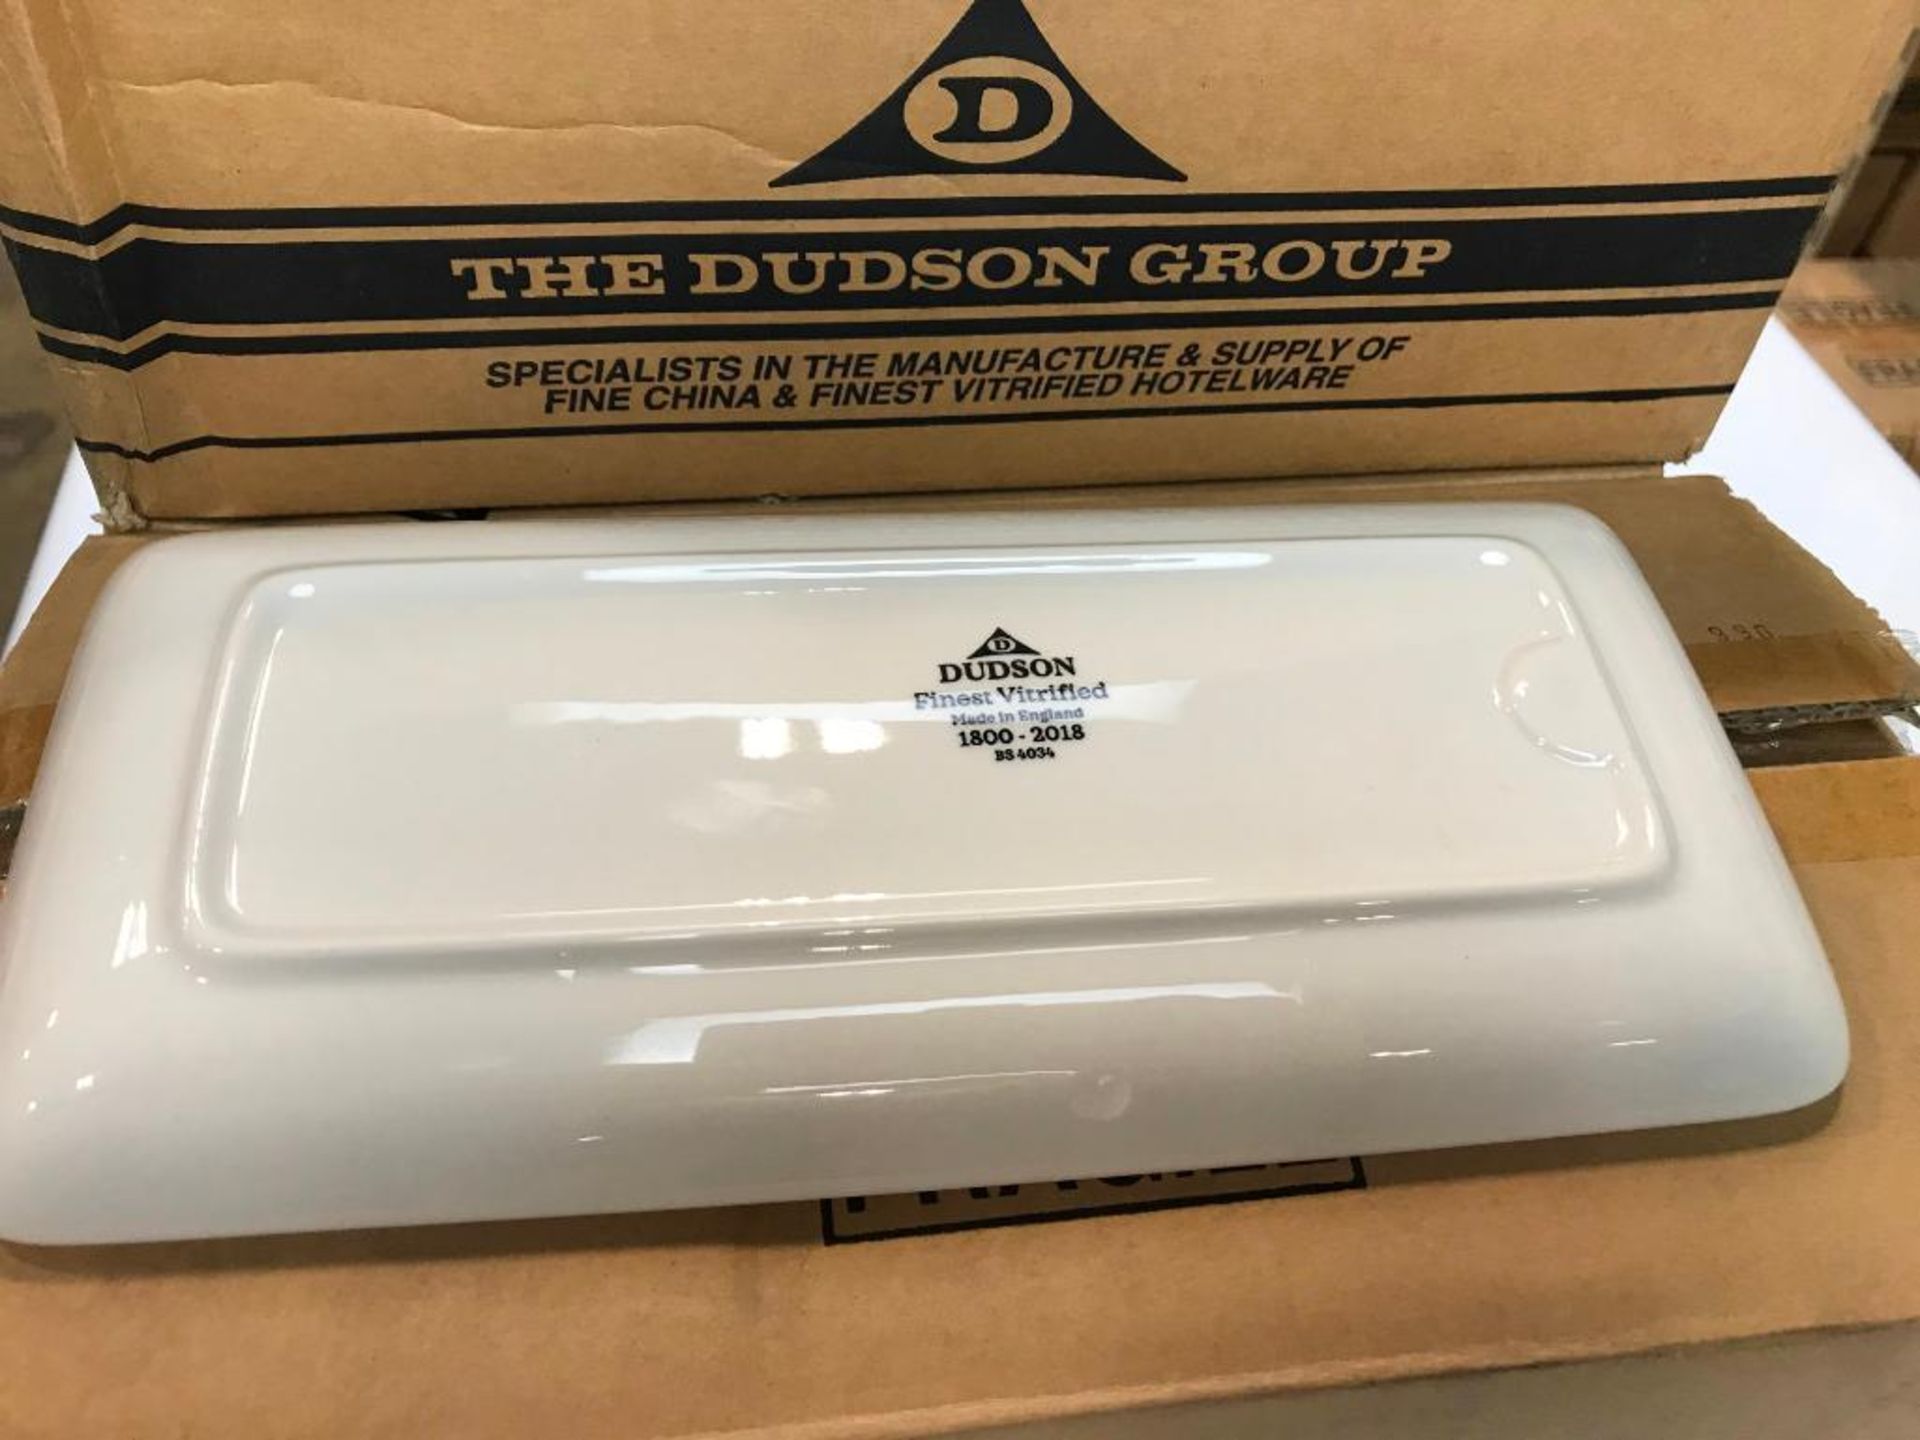 3 CASES OF DUDSON GEOMETRIX RECTANGLE CHEF'S TRAY 10 5/8" - 8/CASE, MADE IN ENGLAND - Image 3 of 5